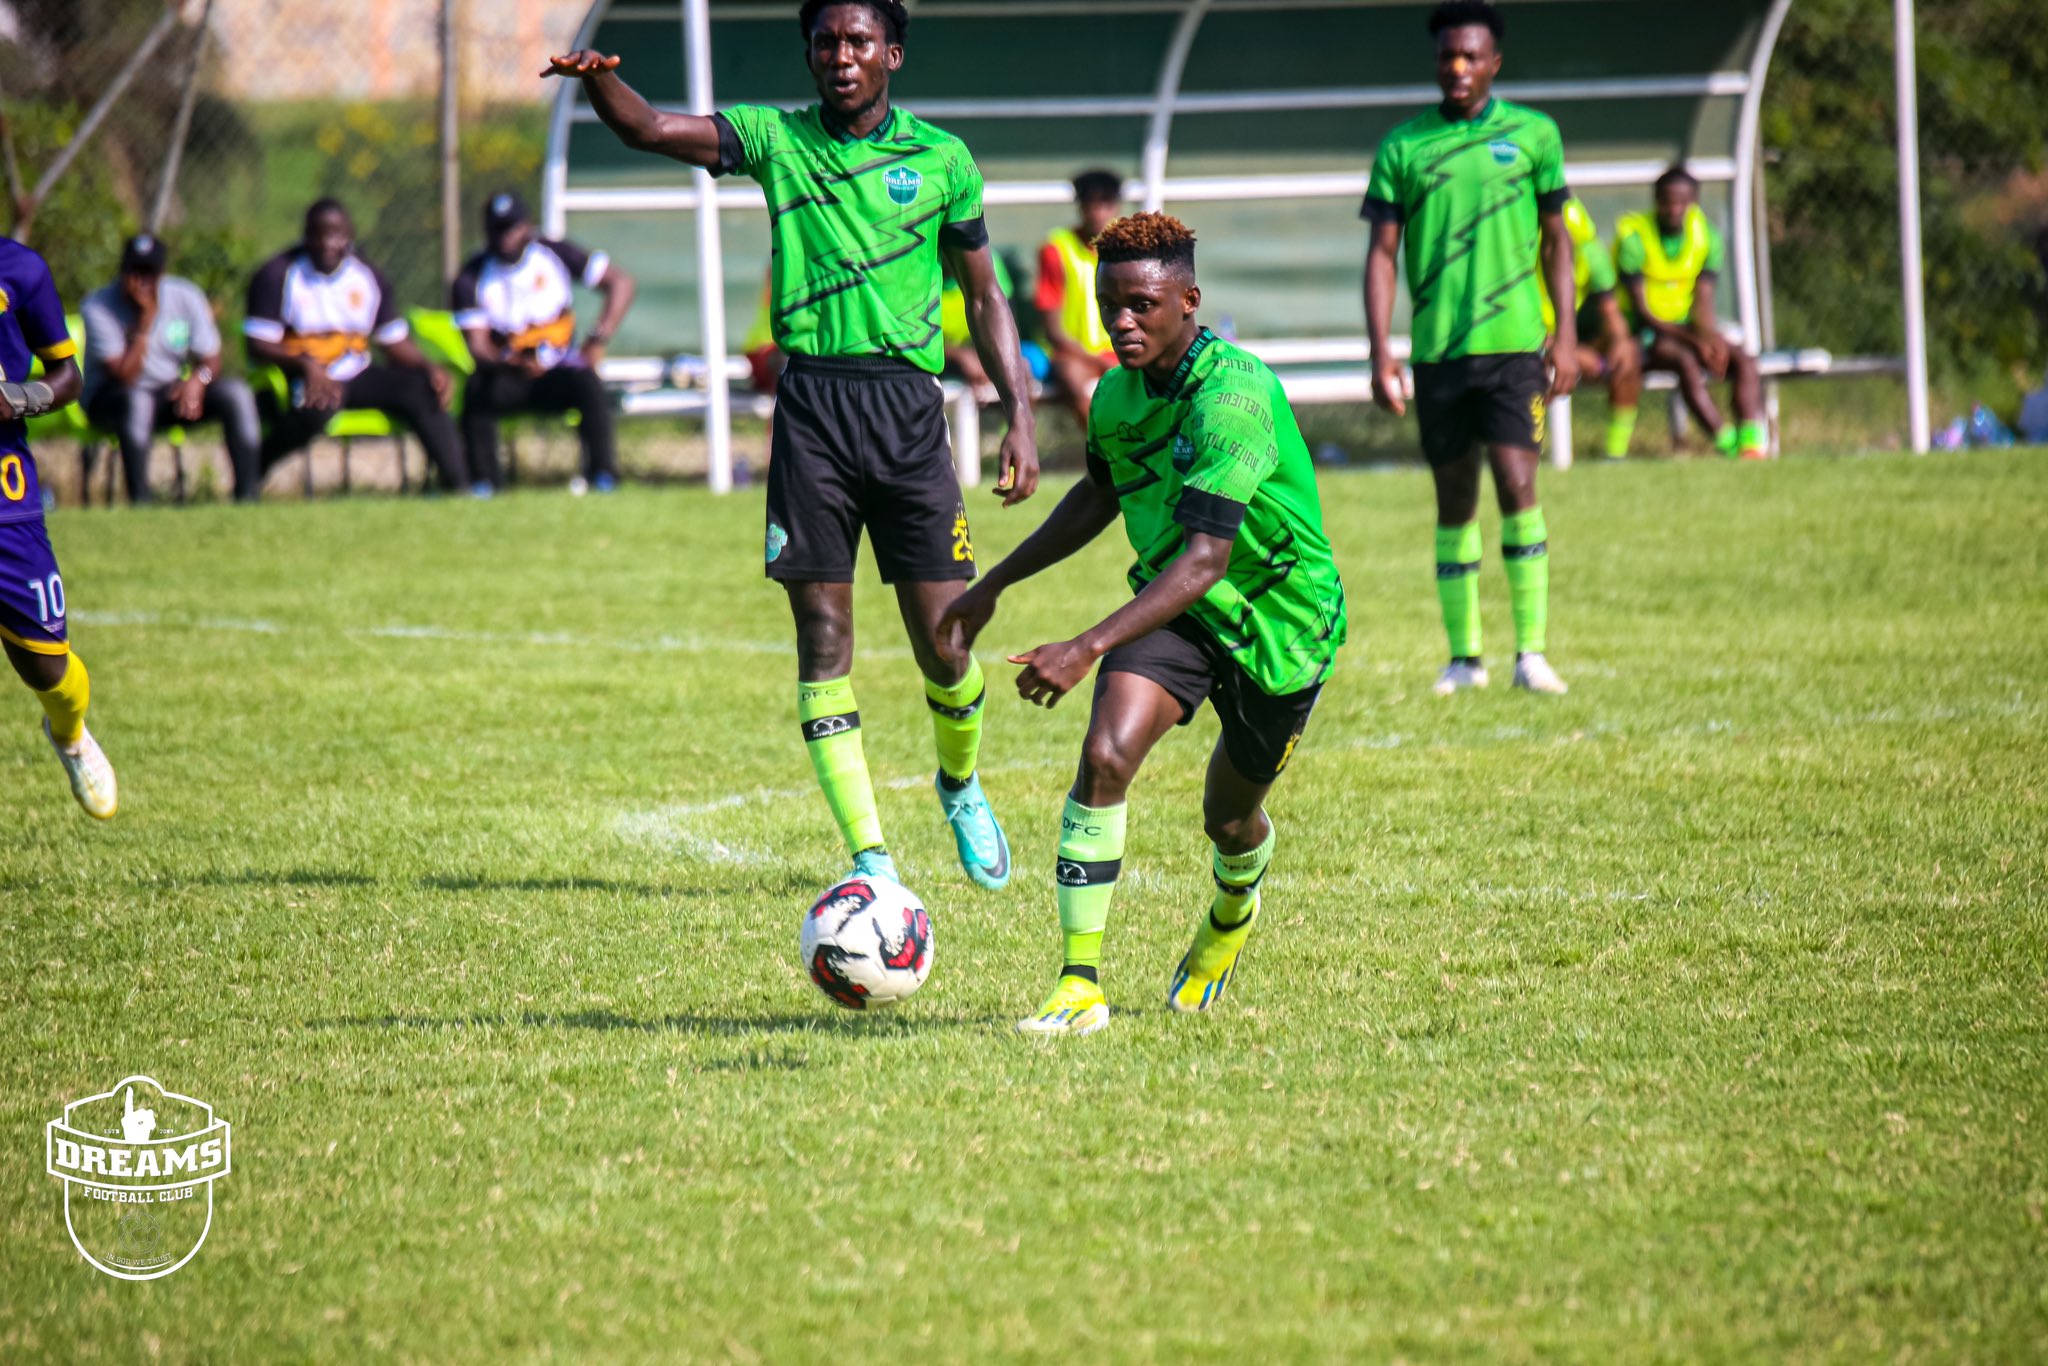 Soccer Intellectuals game difficult – Dreams FC starlet Abdul Aziz Issah